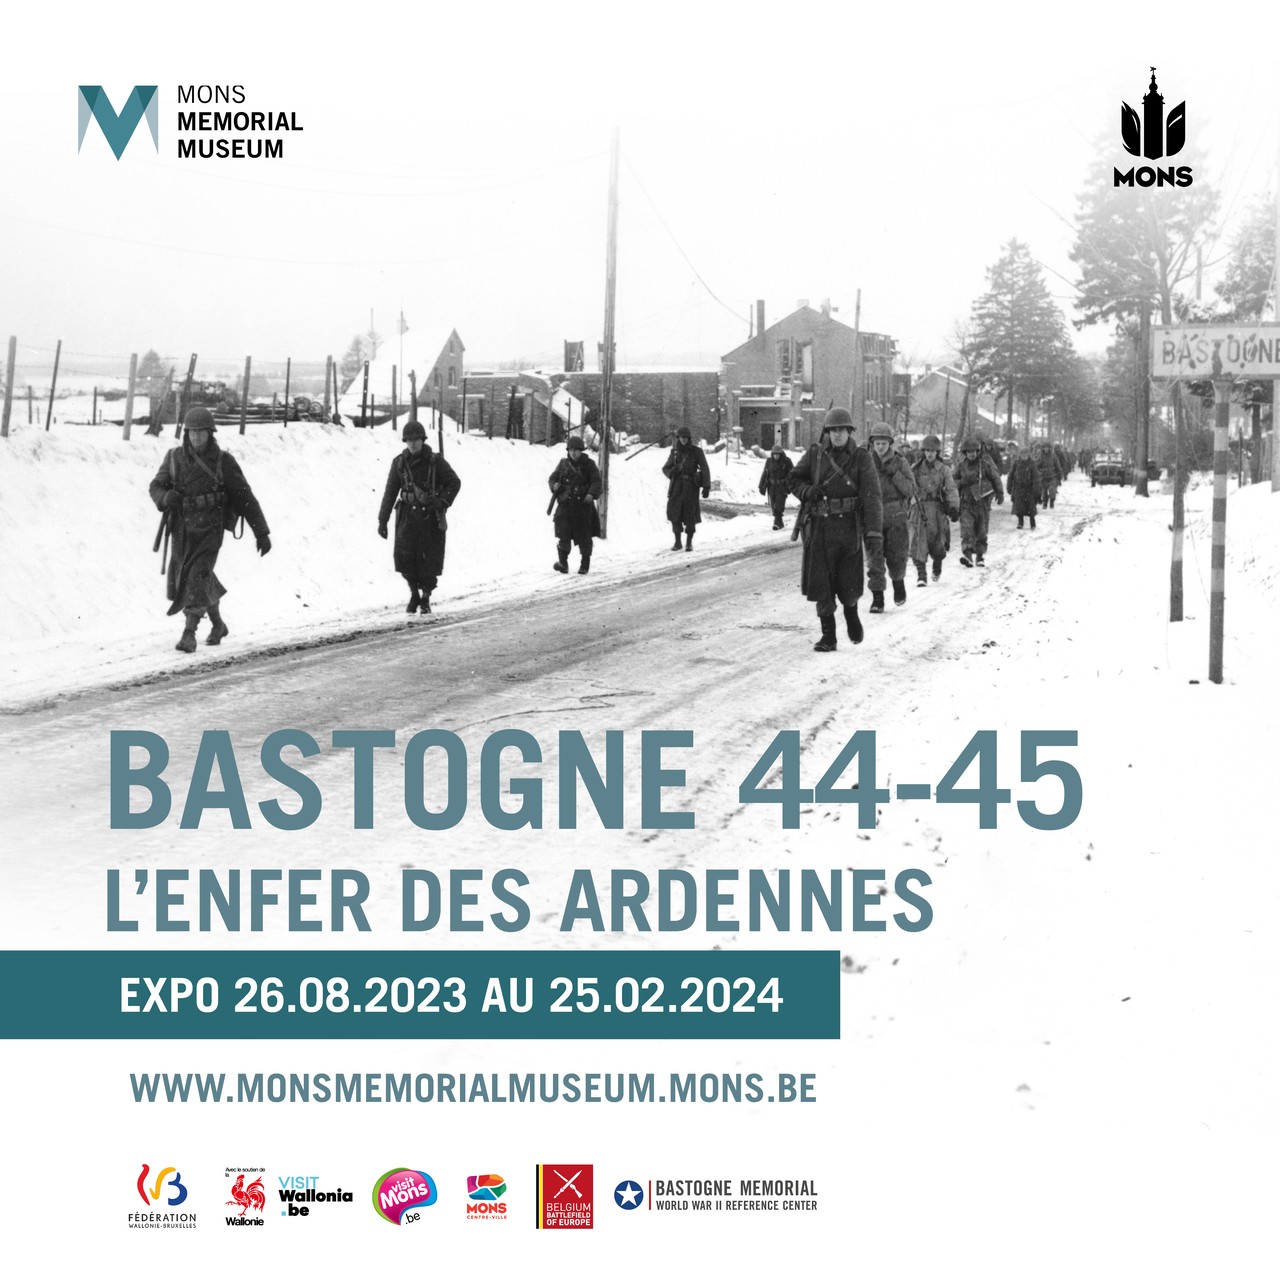 Bastogne 1944, the hell of the Ardennes